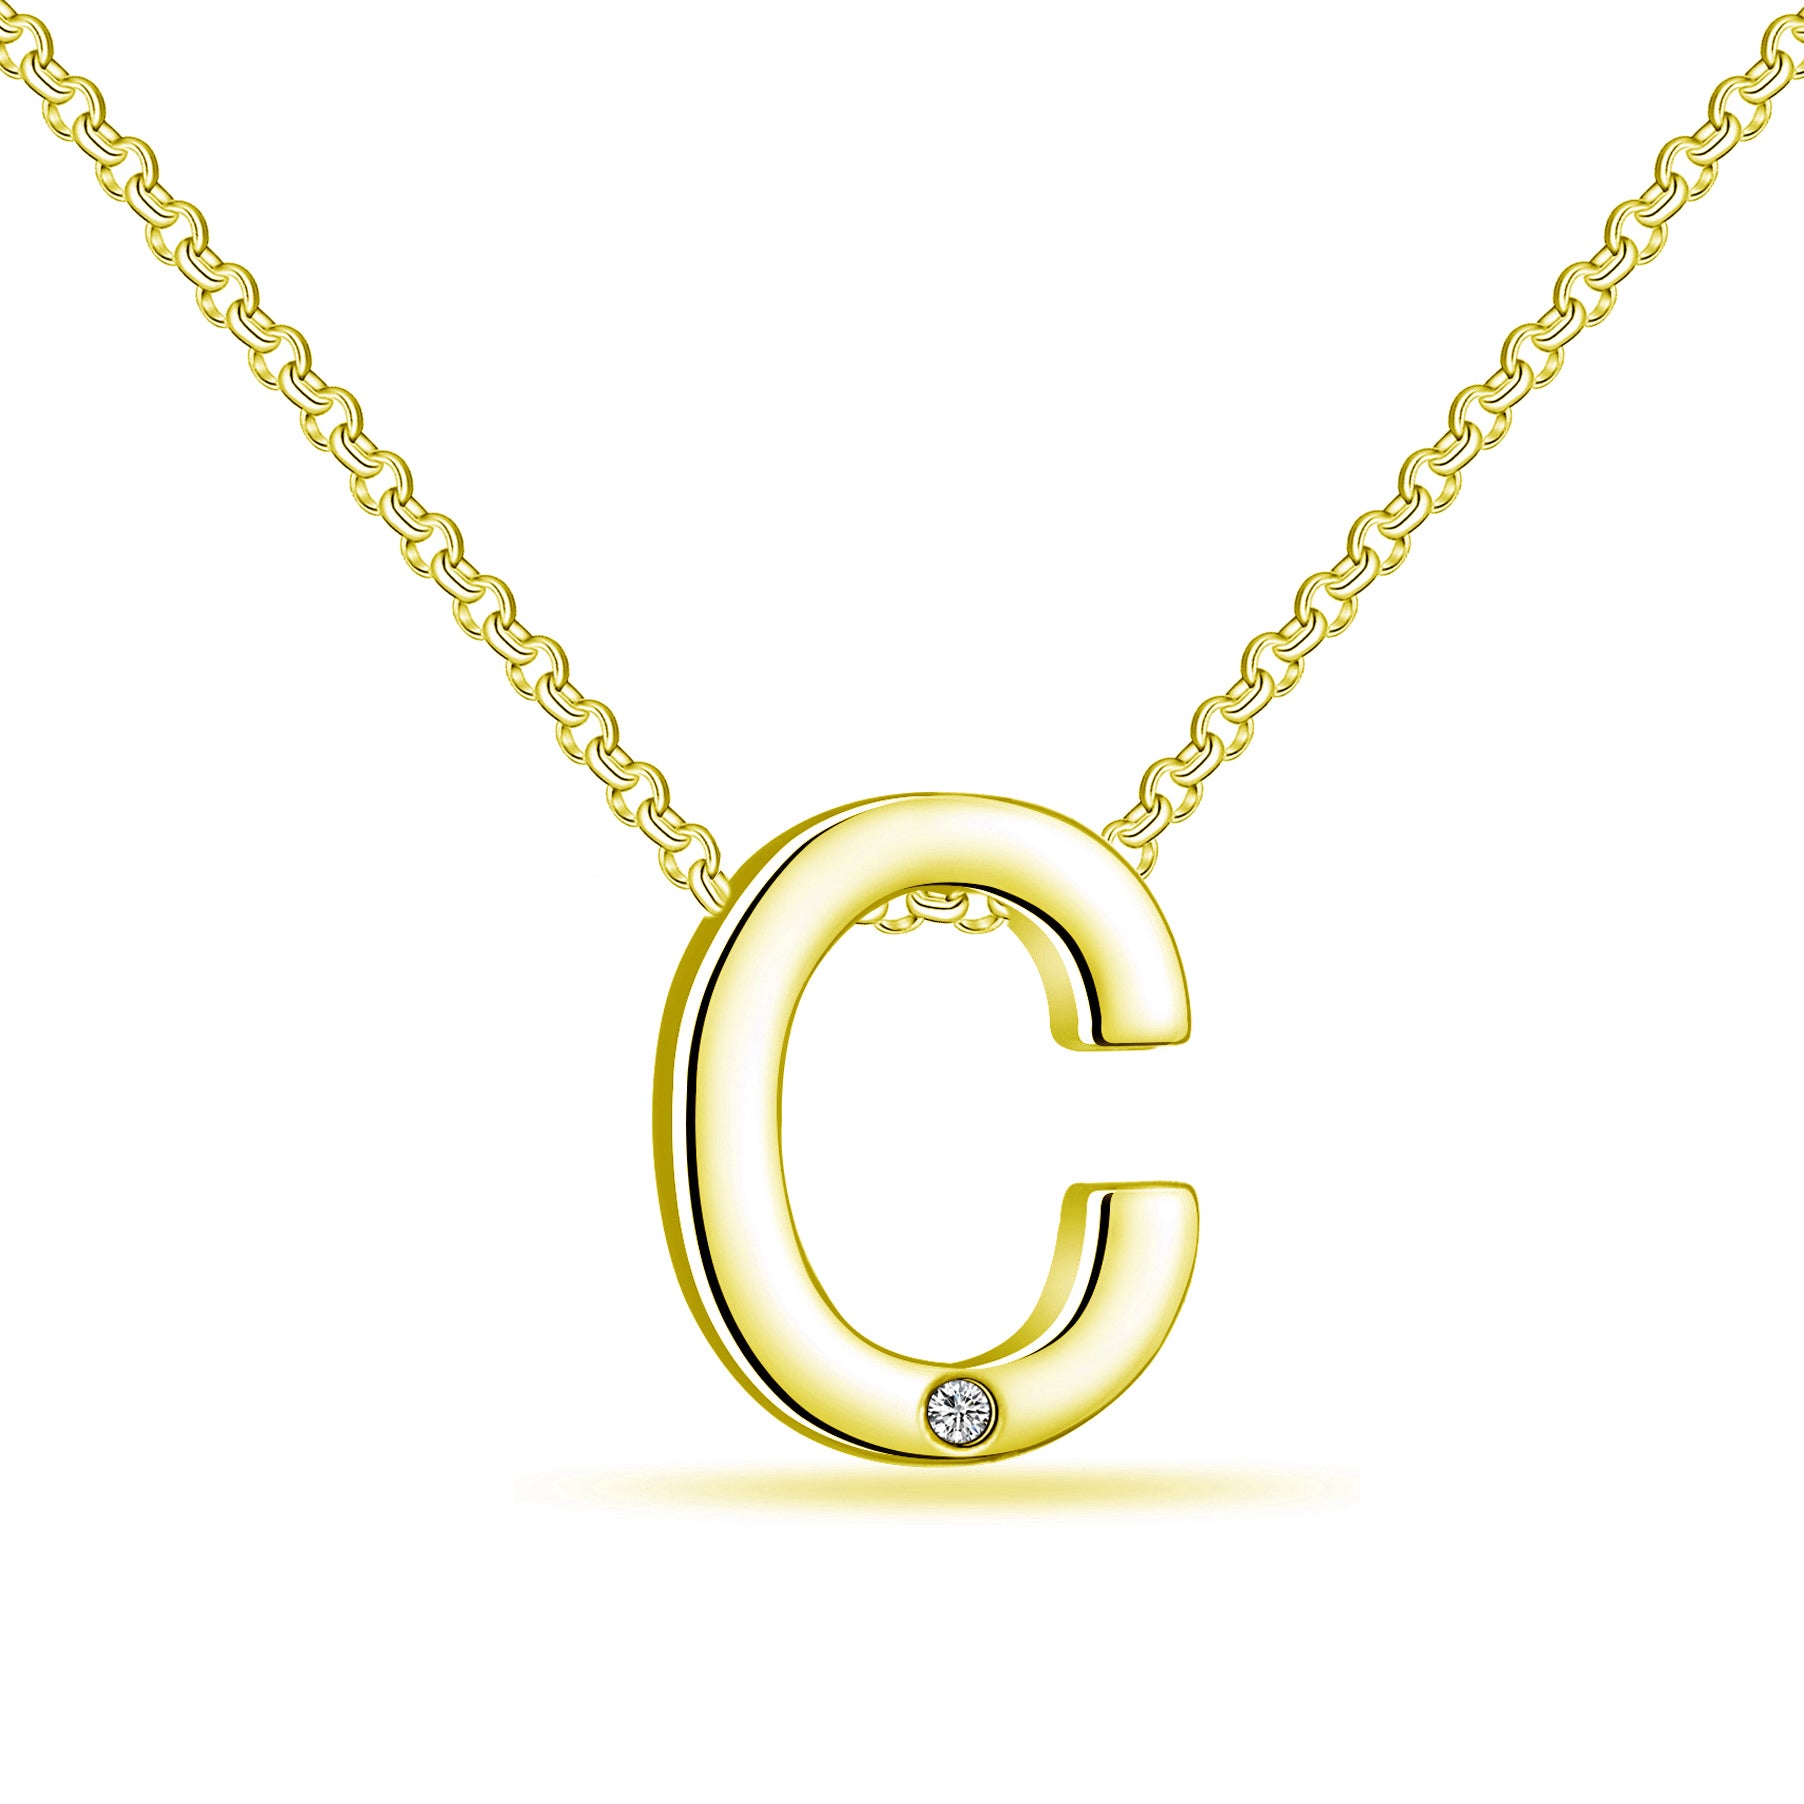 Gold Plated Initial Necklace Letter C Created with Zircondia® Crystals by Philip Jones Jewellery